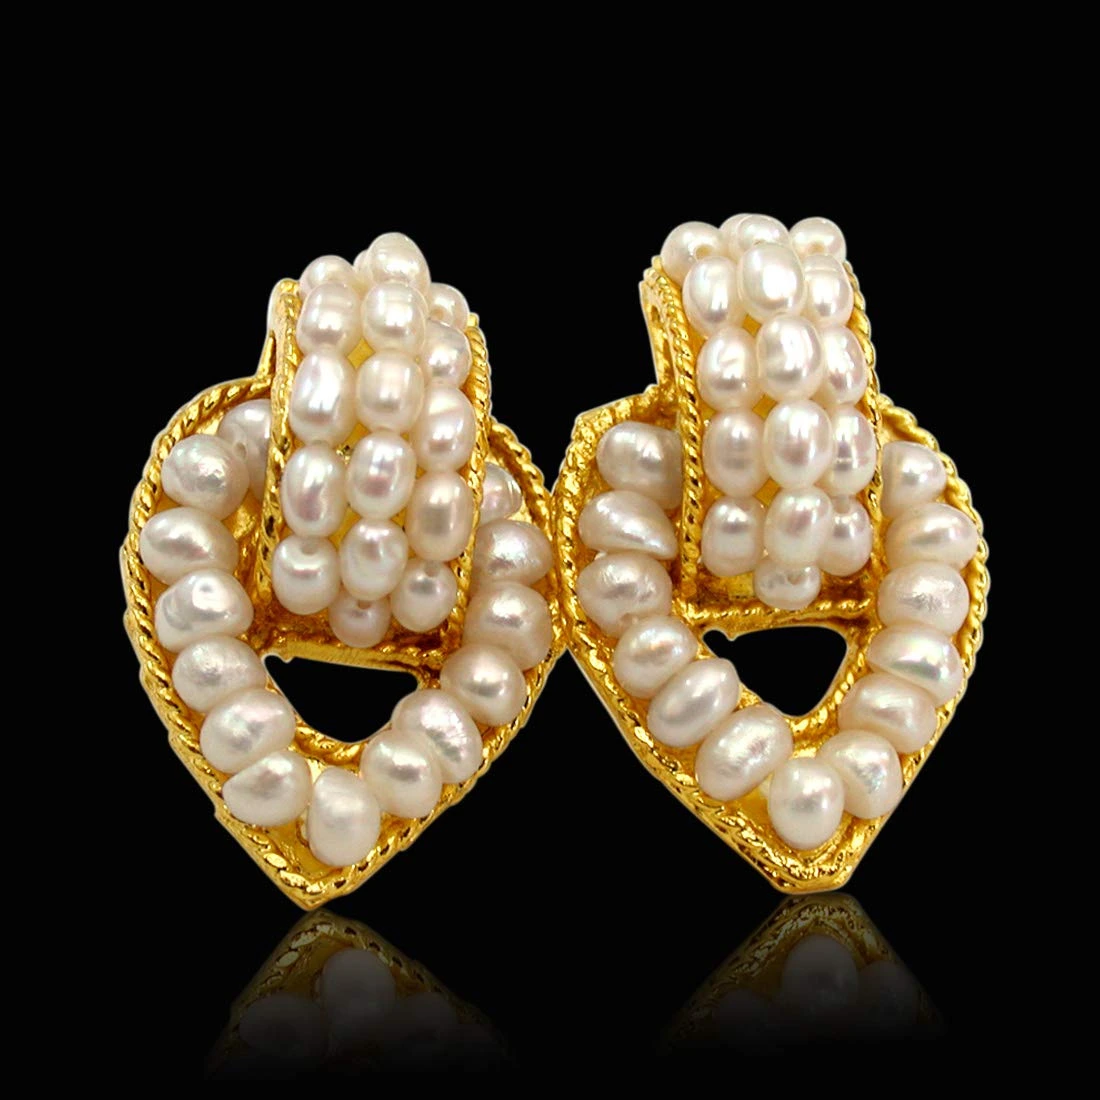 Pearl Charmer - Real Freshwater Pearl & Gold Plated Earrings for Women (SE50)